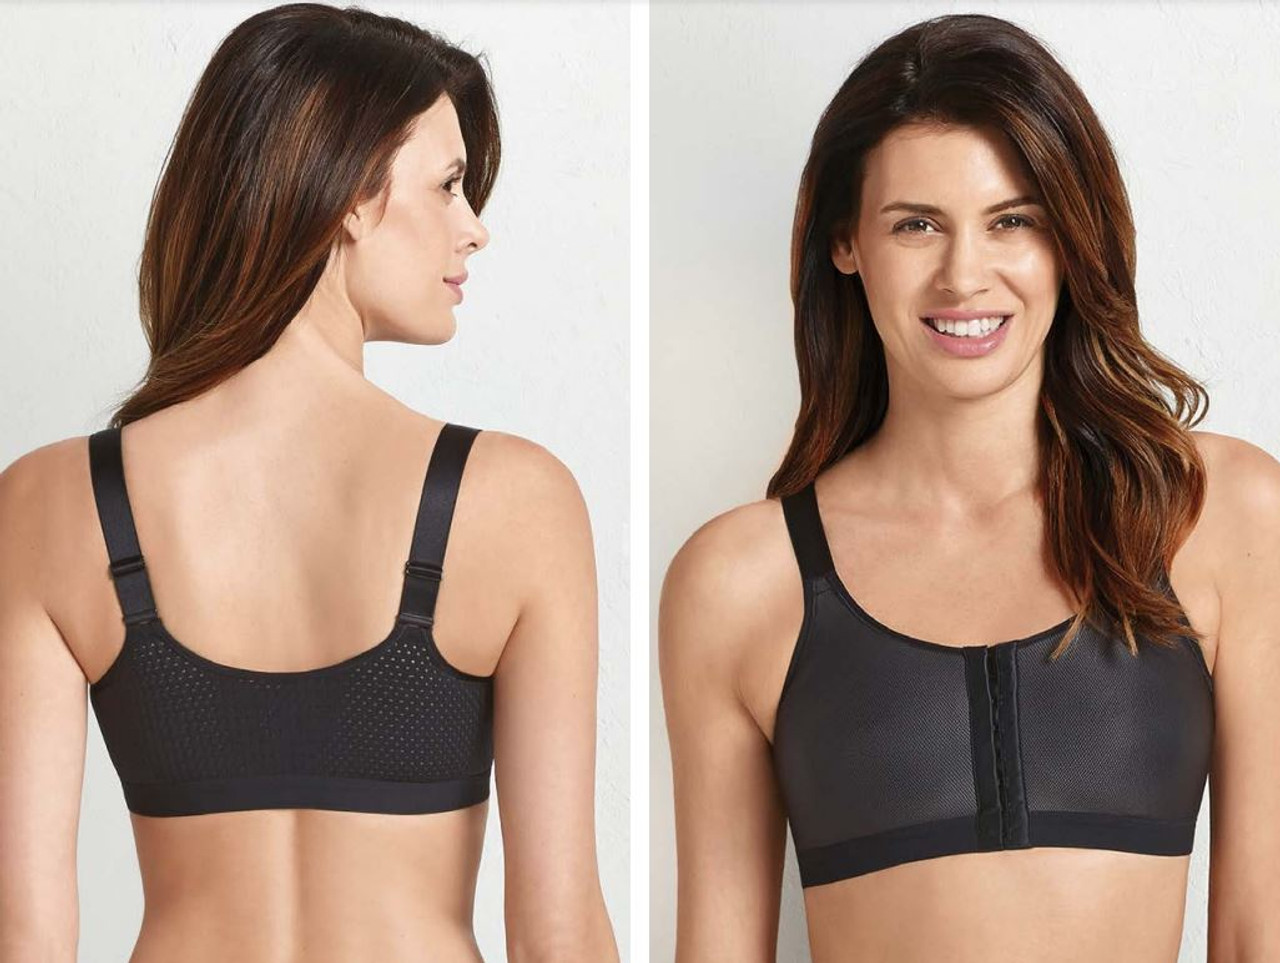 Mastectomy Bra for Womens Front Closure Cotton with Pocket for